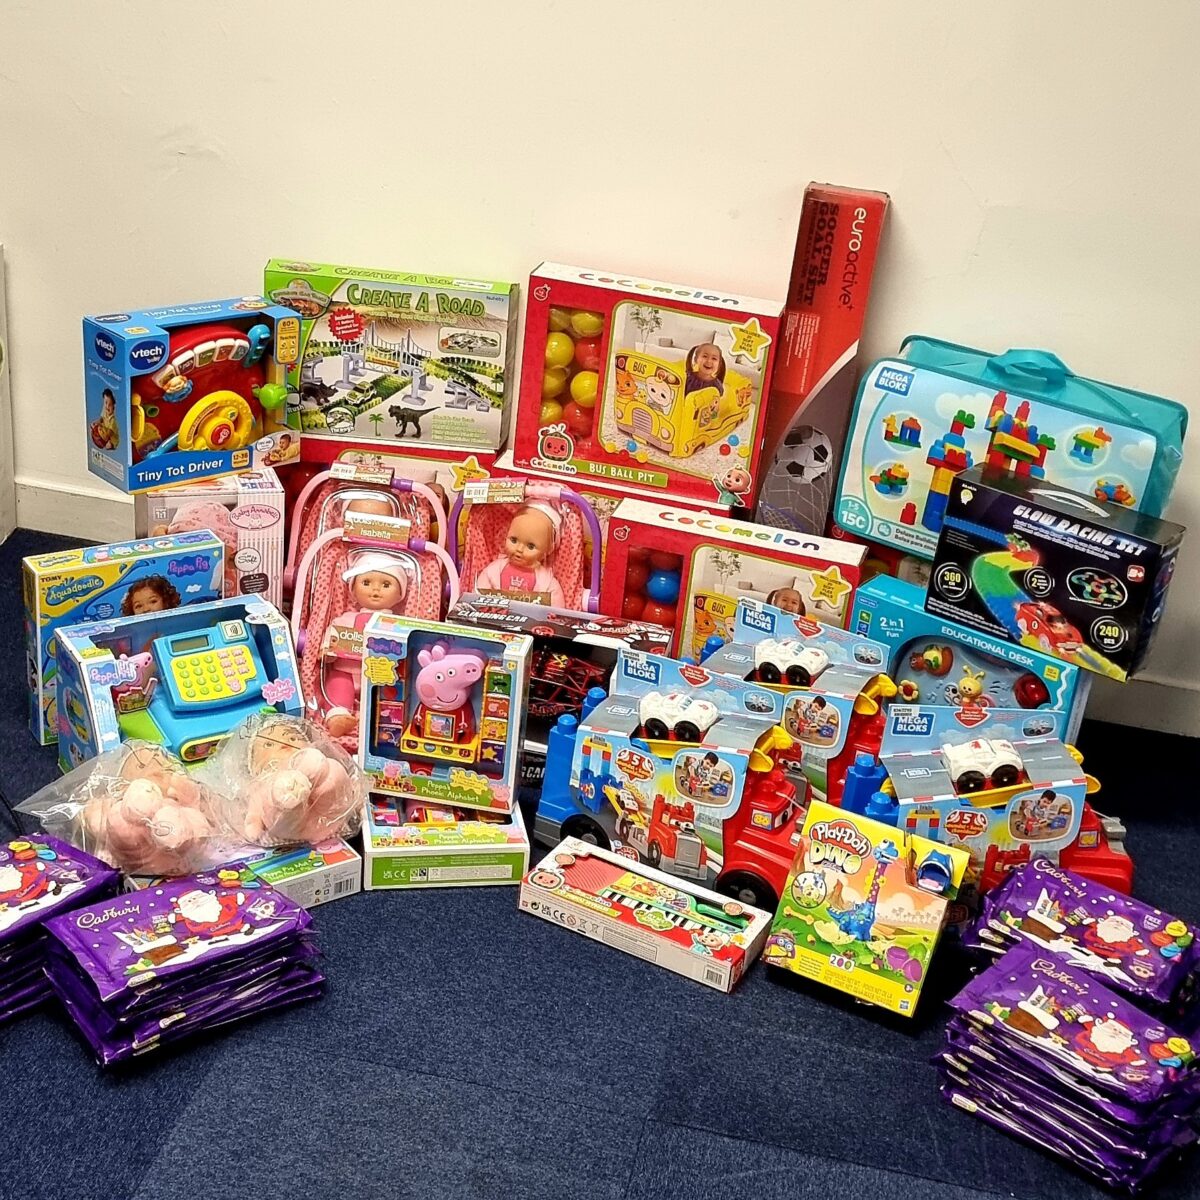 Friends Legal Donates Christmas presents to children for charity